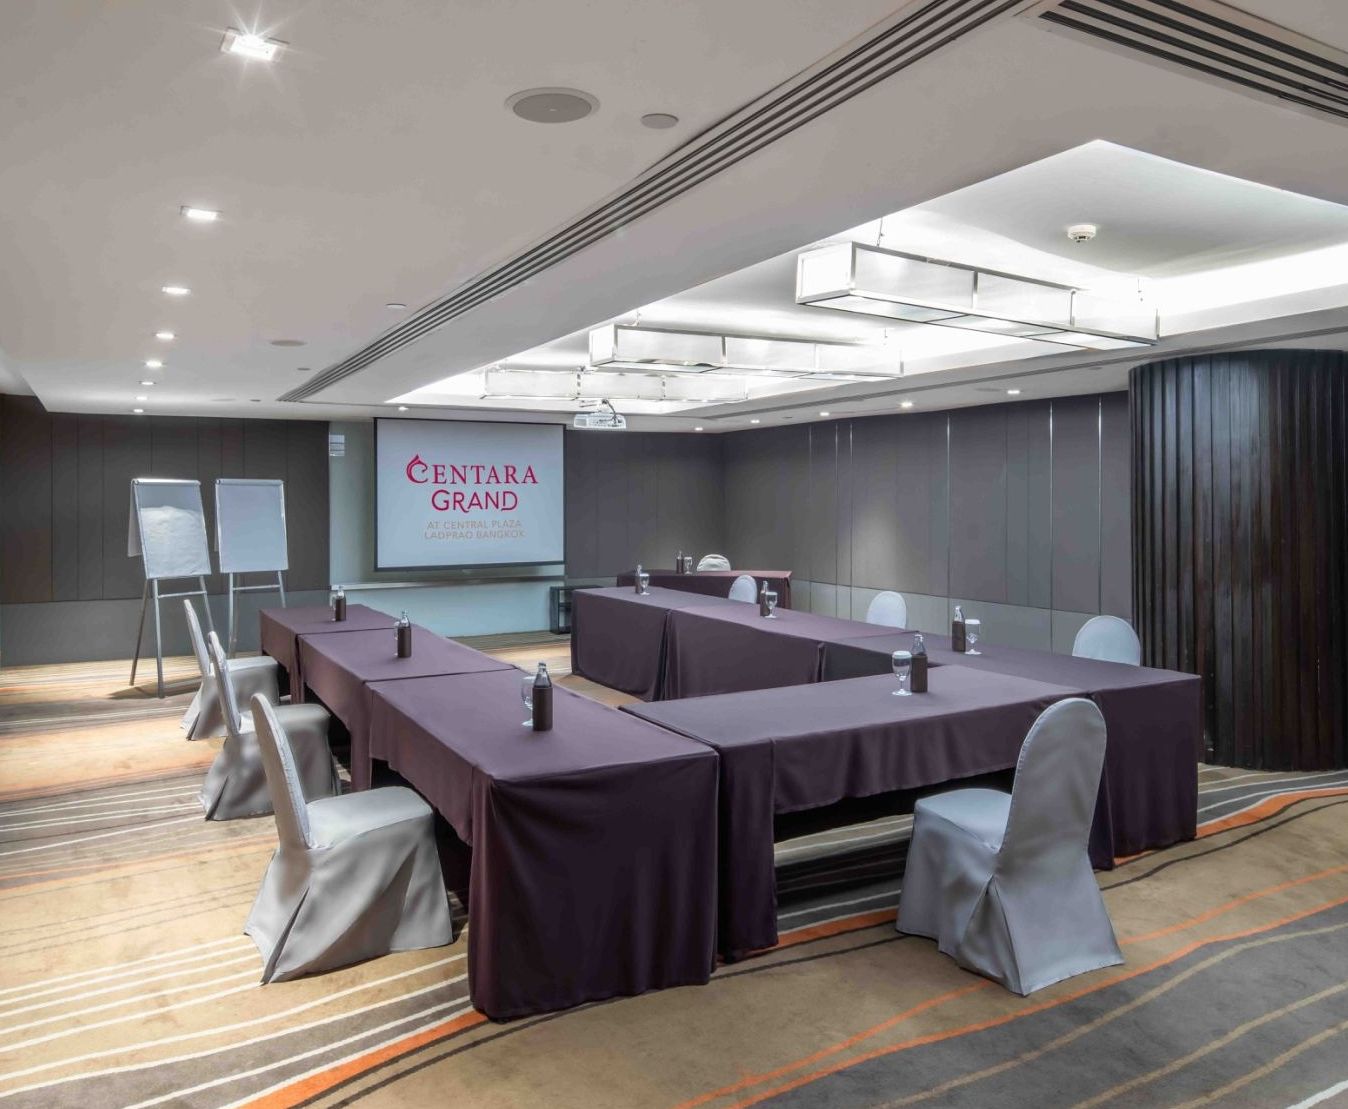 2. CENTARA MEETING SHOWCASE TO DELIVER BETTER MEETINGS 3